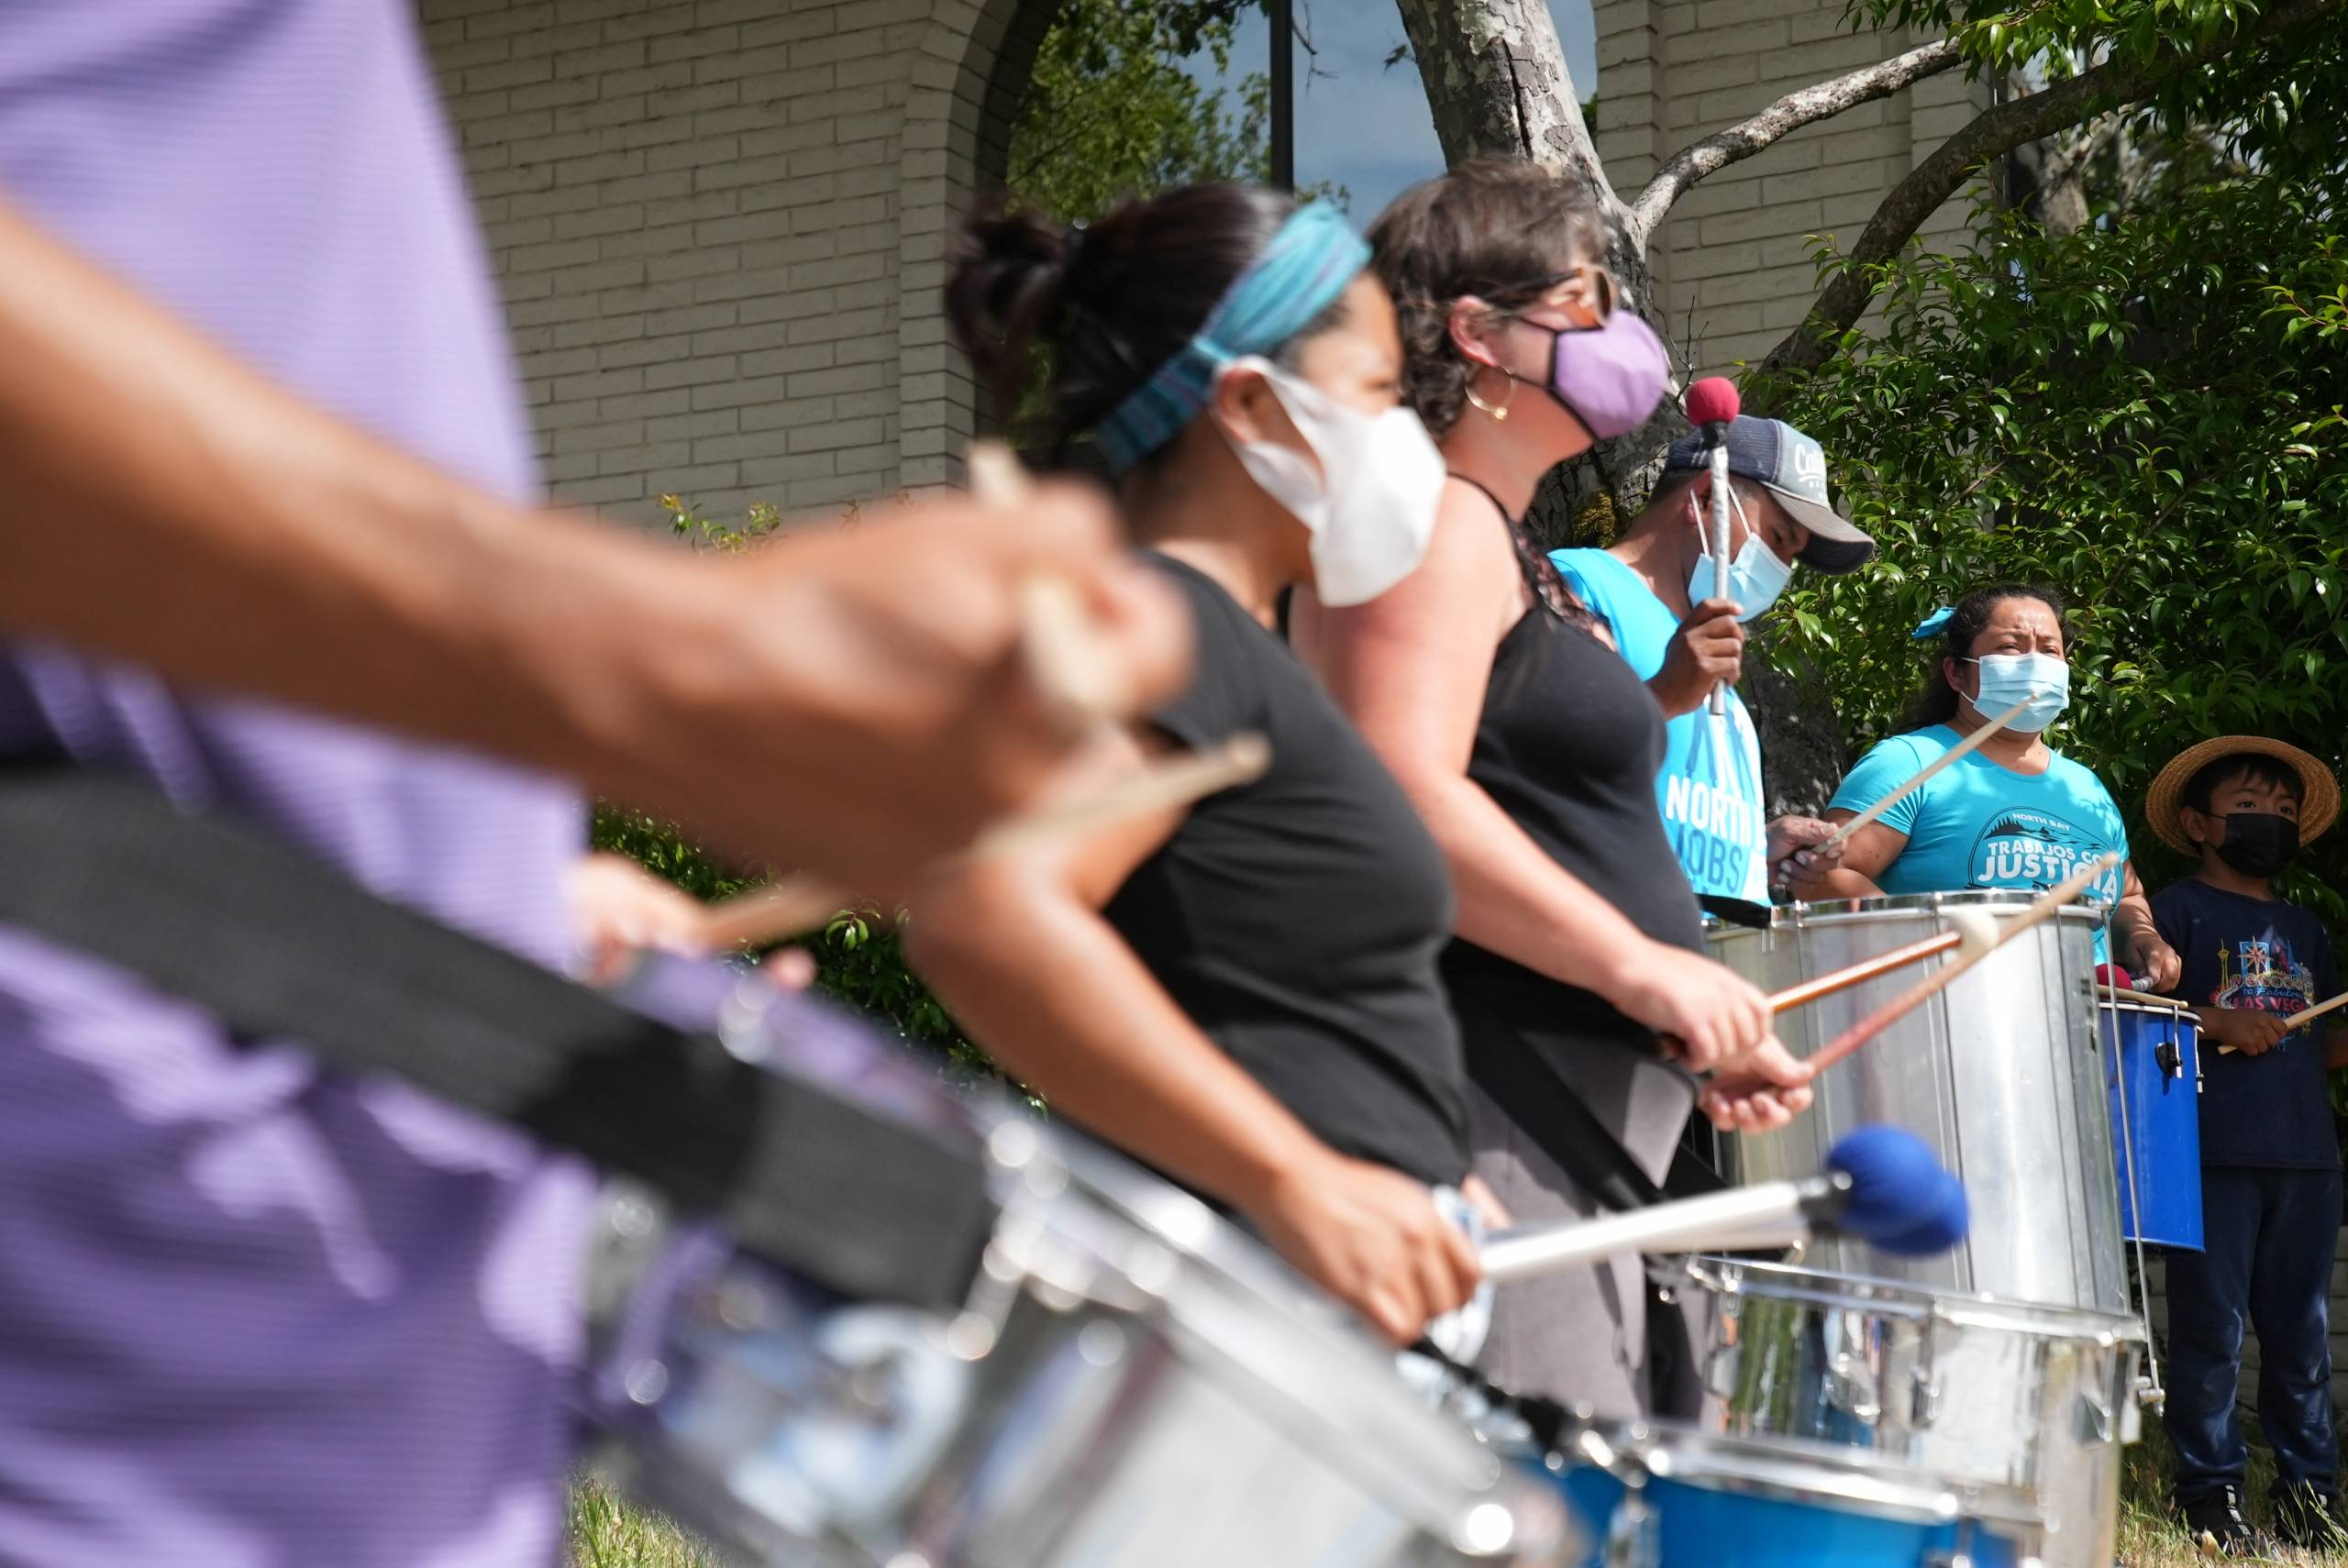 A group of people play the drums outside of an office building.